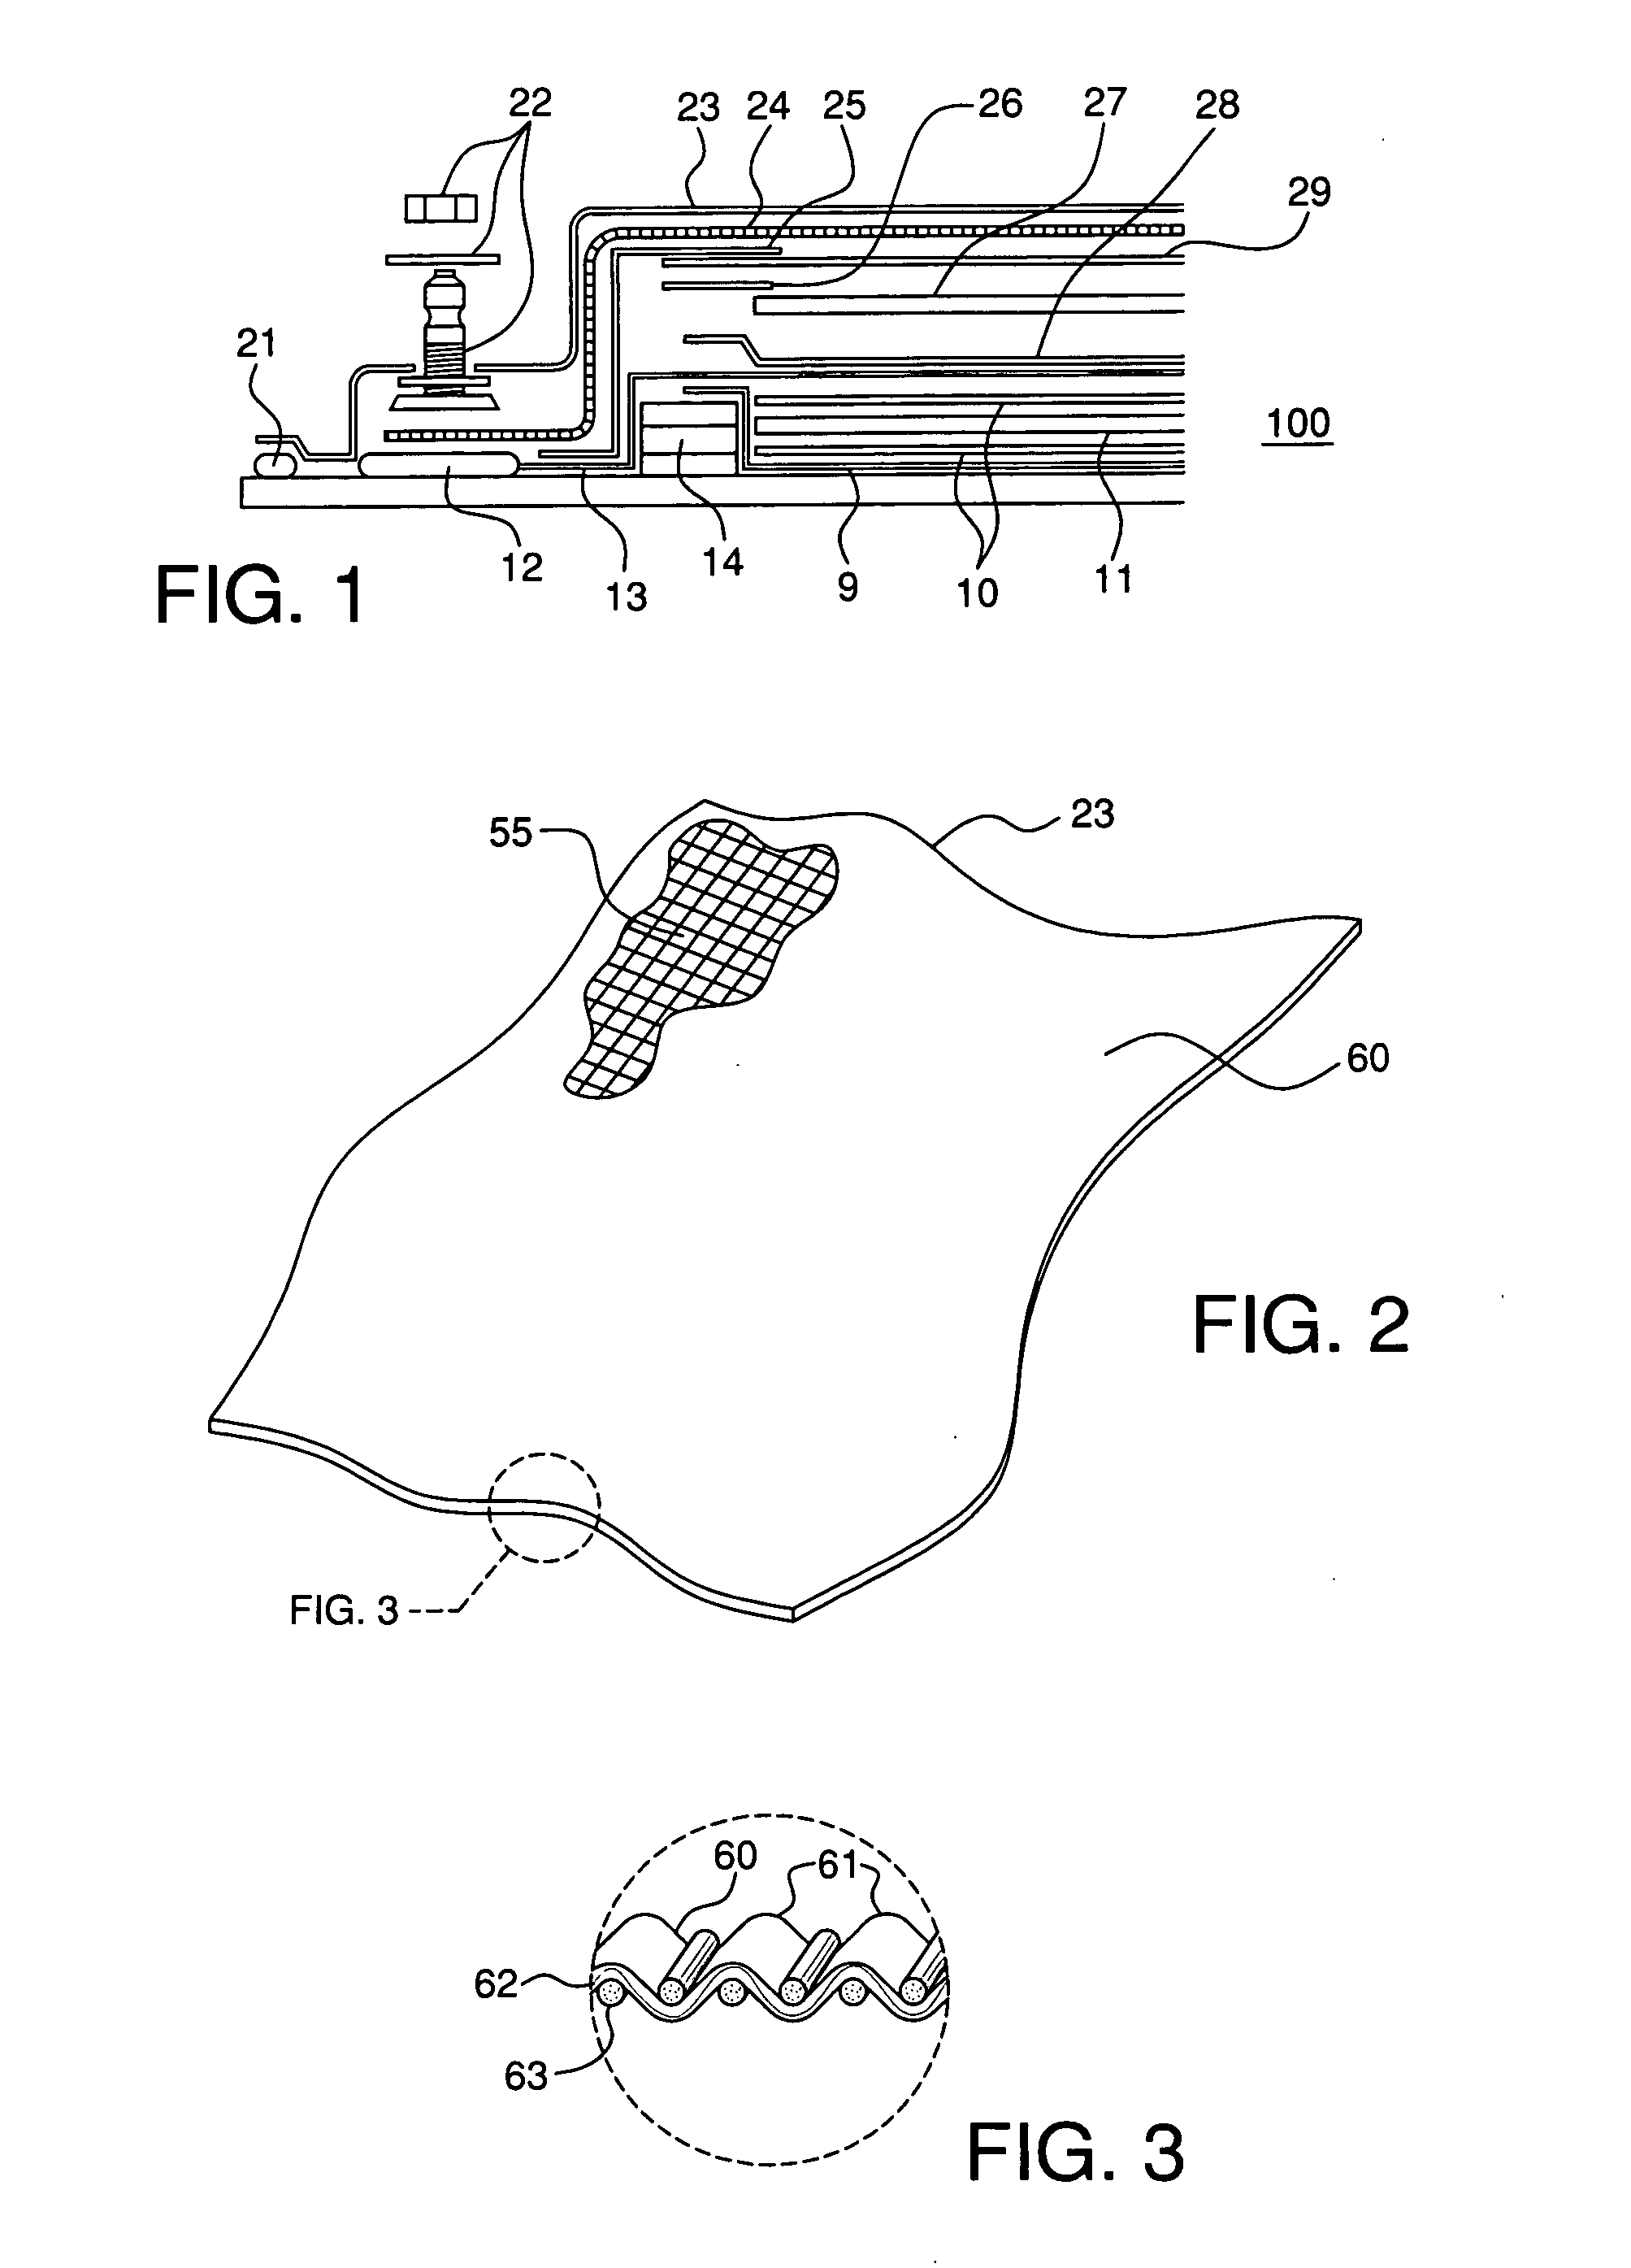 Reusable vacuum bag and methods of its use